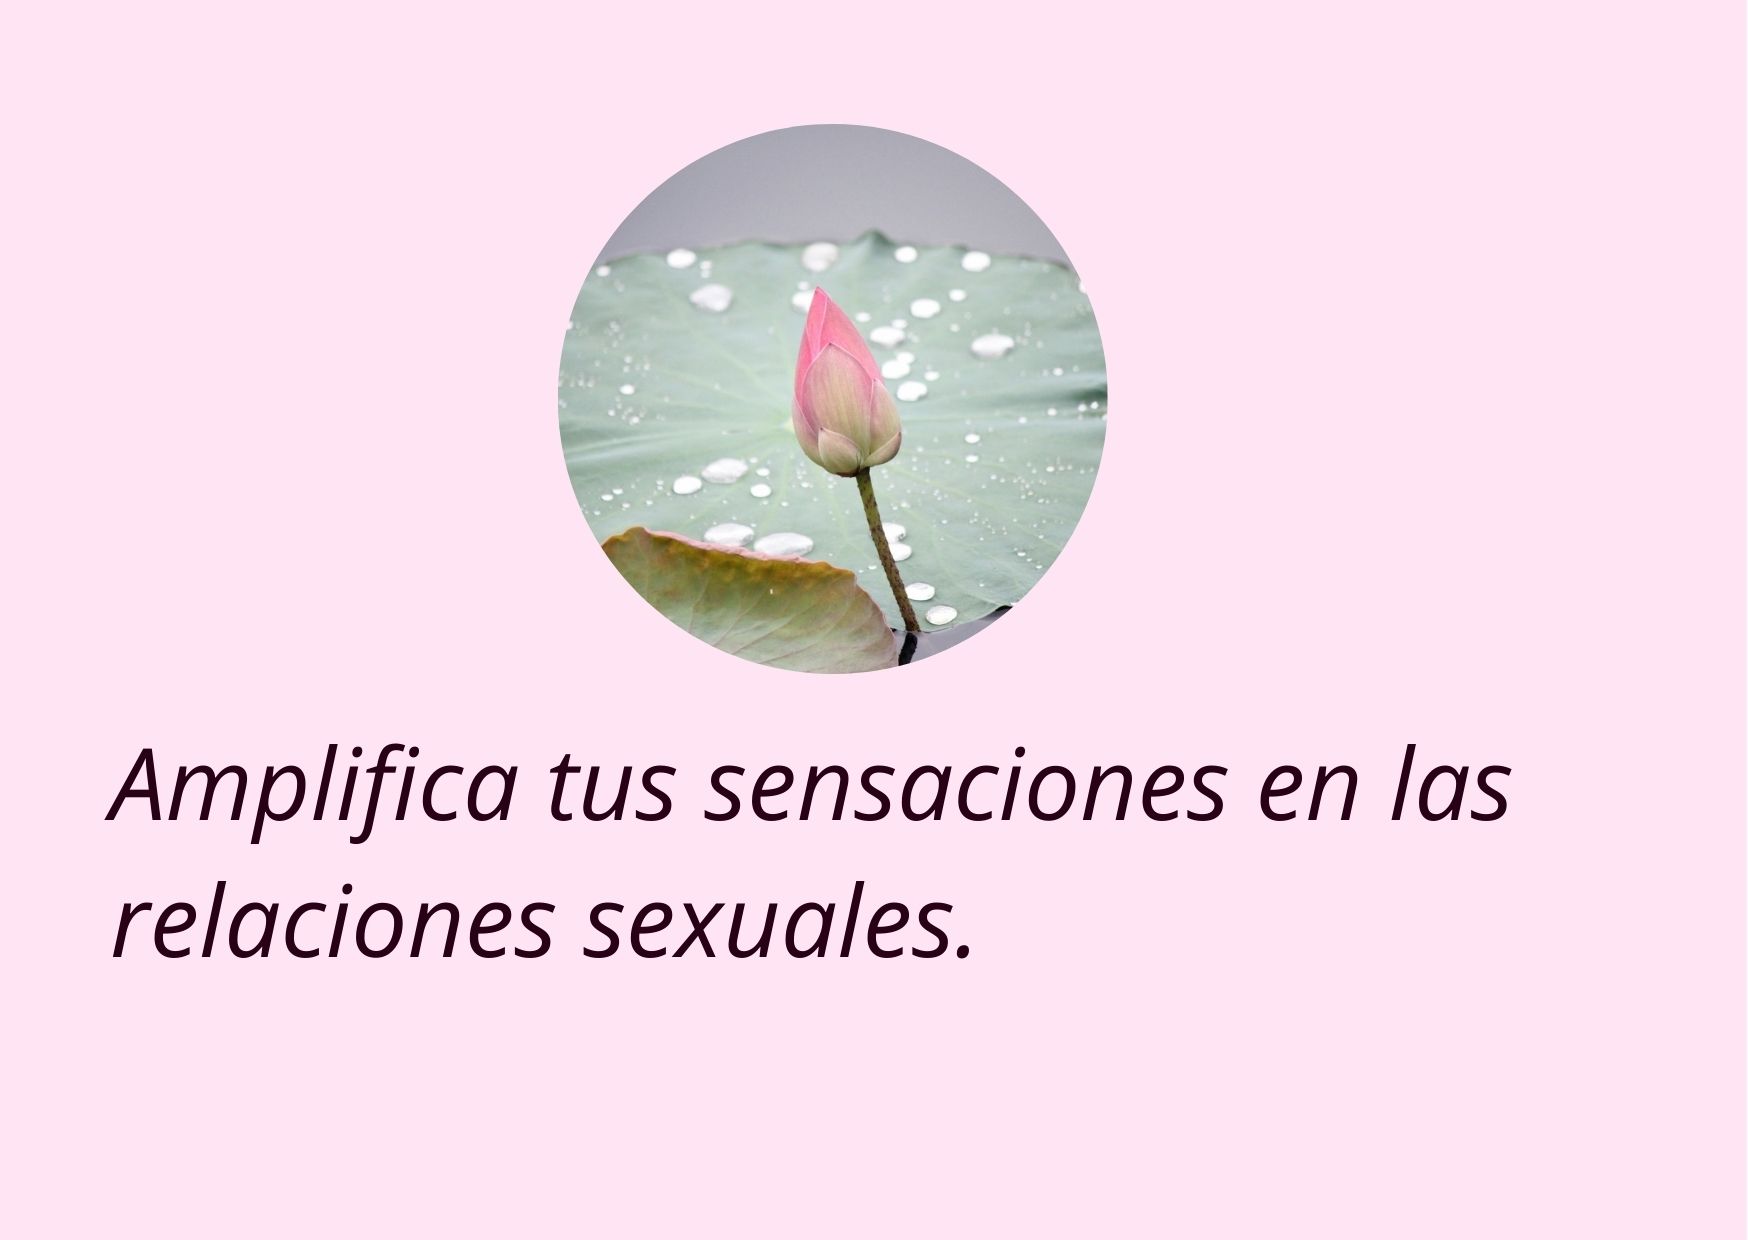 placer sexual mujer